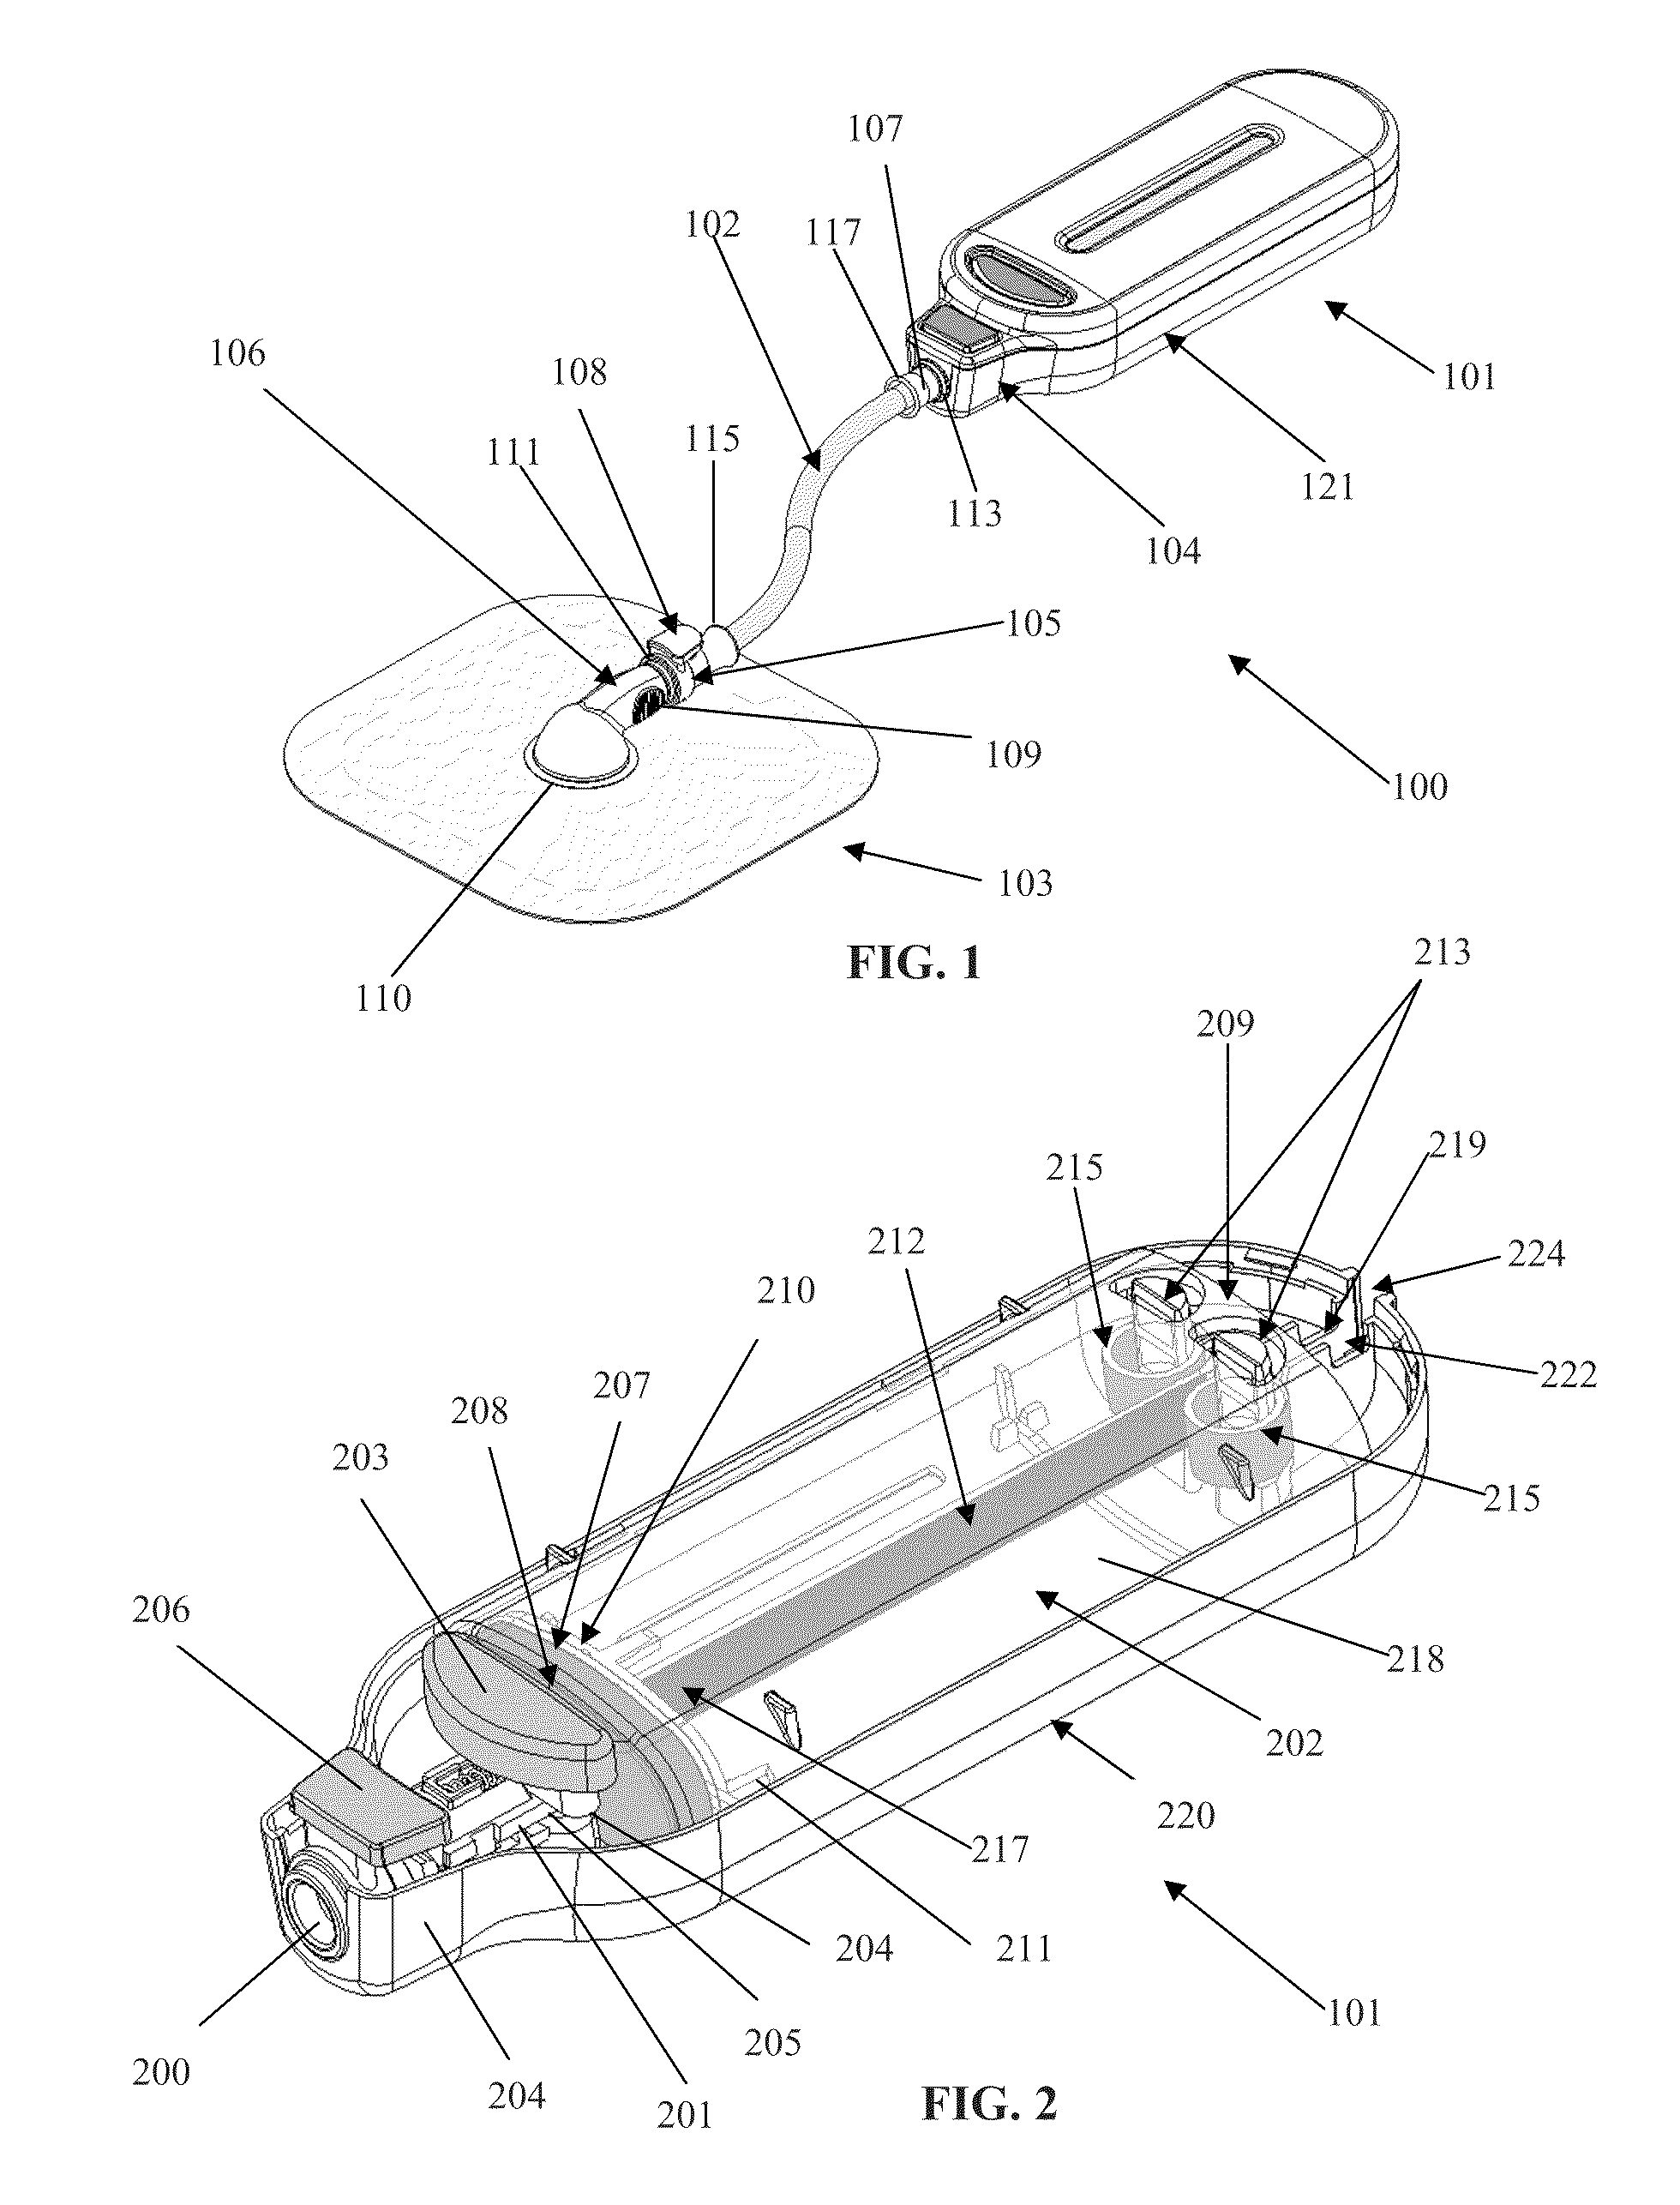 Devices and methods to apply alternating level of reduced pressure to tissue